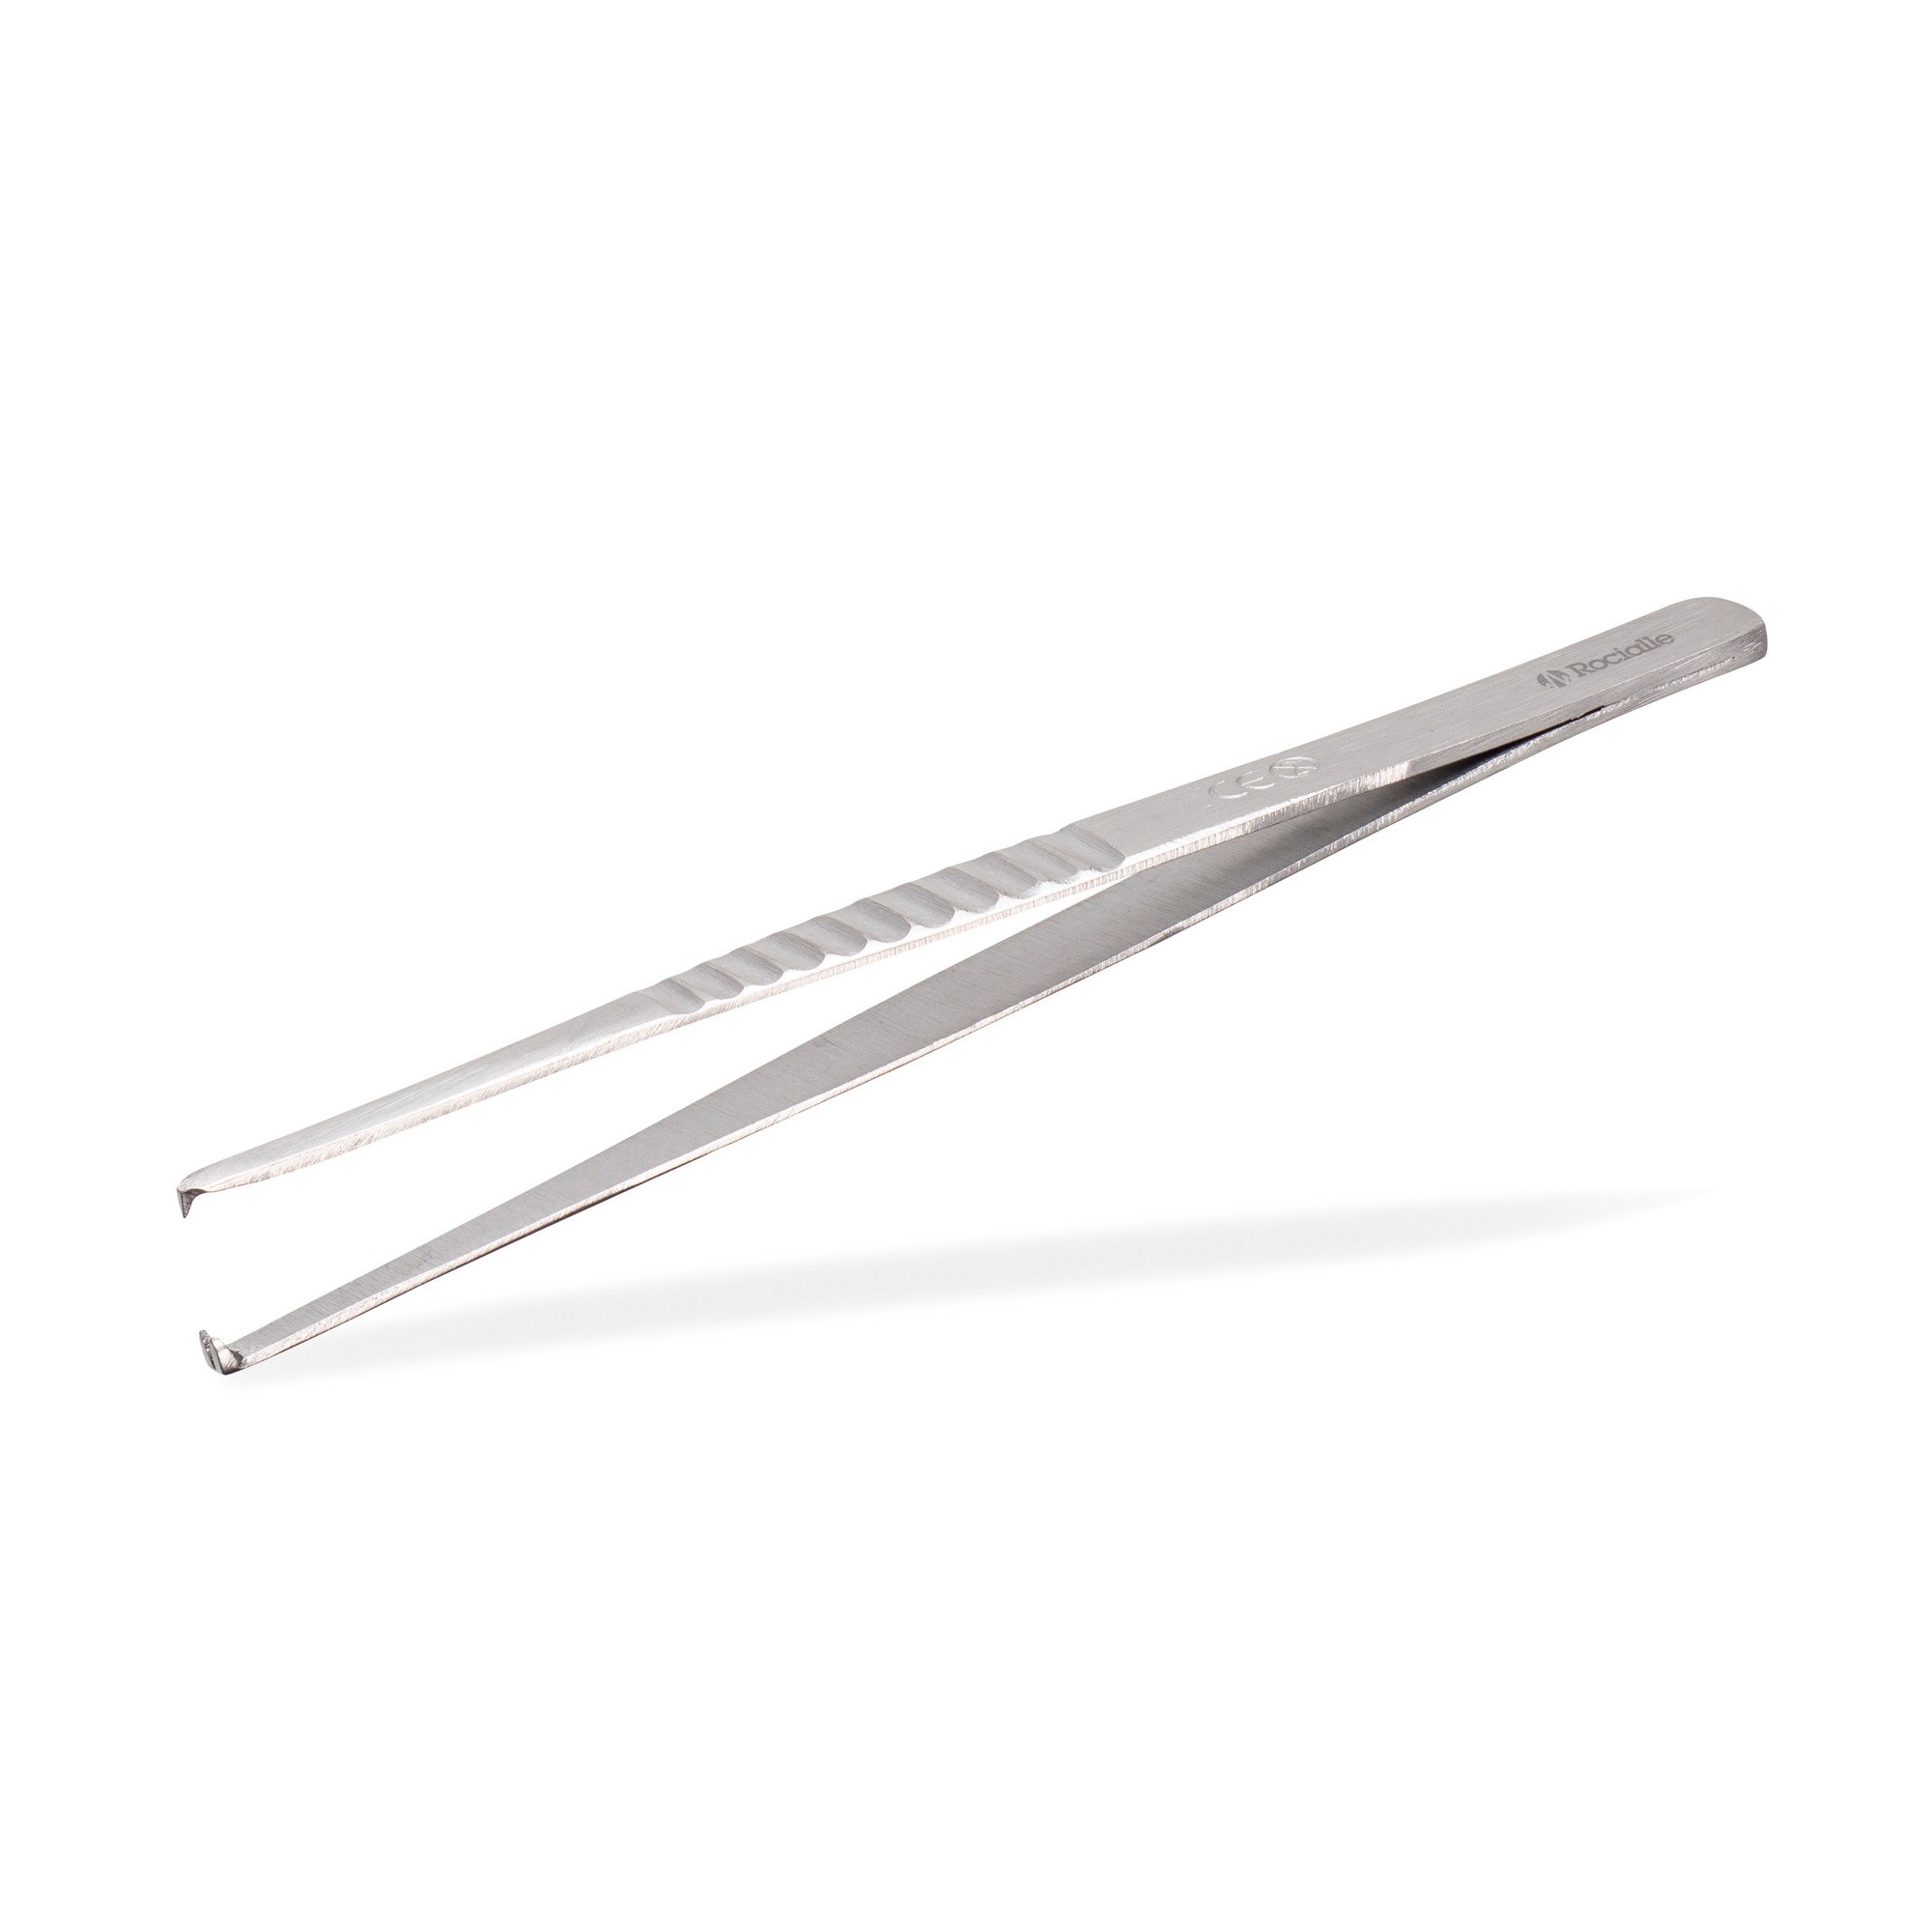 Forceps - Dissecting - Treves Toothed 12.5cm x 10